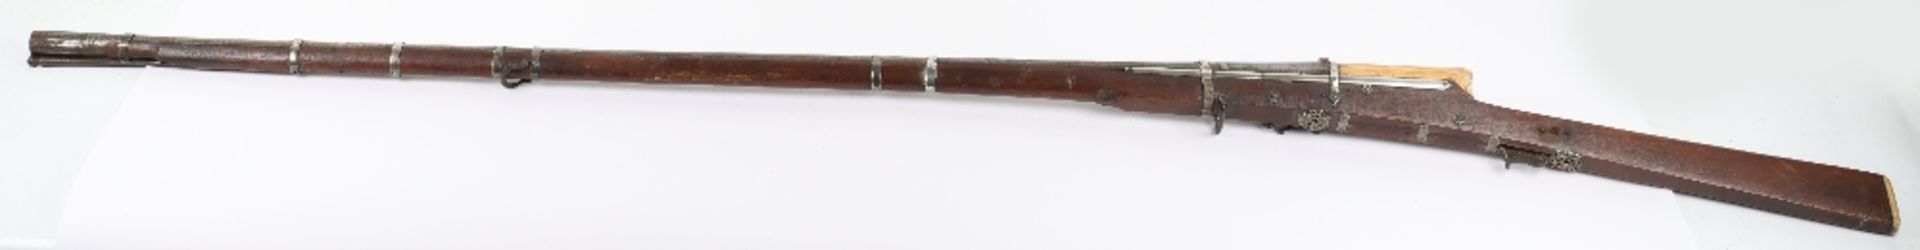 ^ Good Quality 25 Bore Indian Matchlock Gun Torador from Rajasthan, Probably Rajput c.1800 - Image 14 of 14